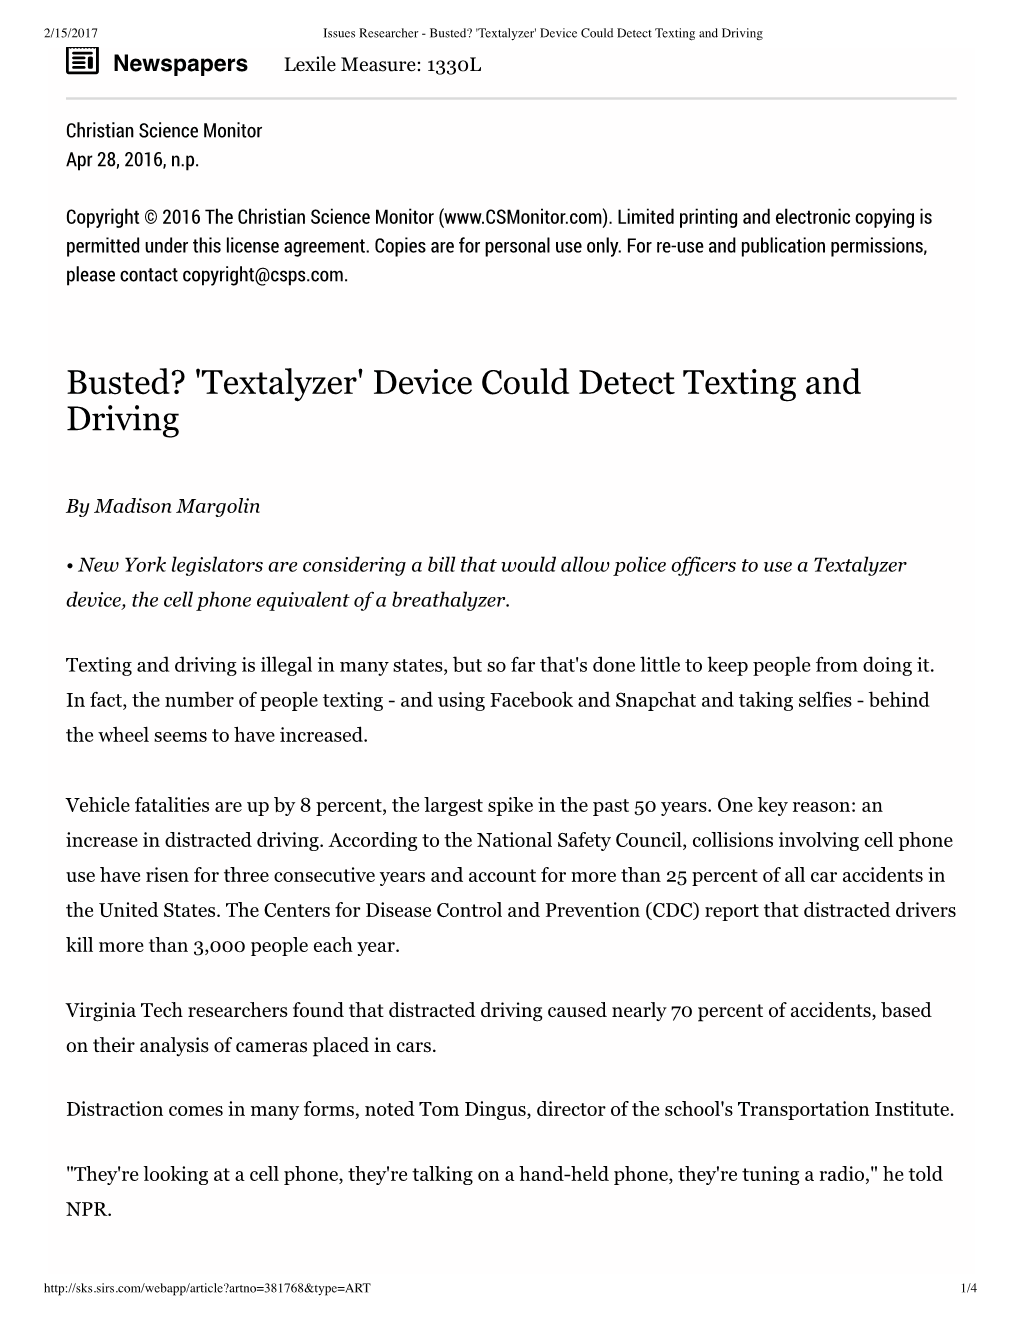 Busted? 'Textalyzer' Device Could Detect Texting and Driving W Newspapers Lexile Measure: 1330L